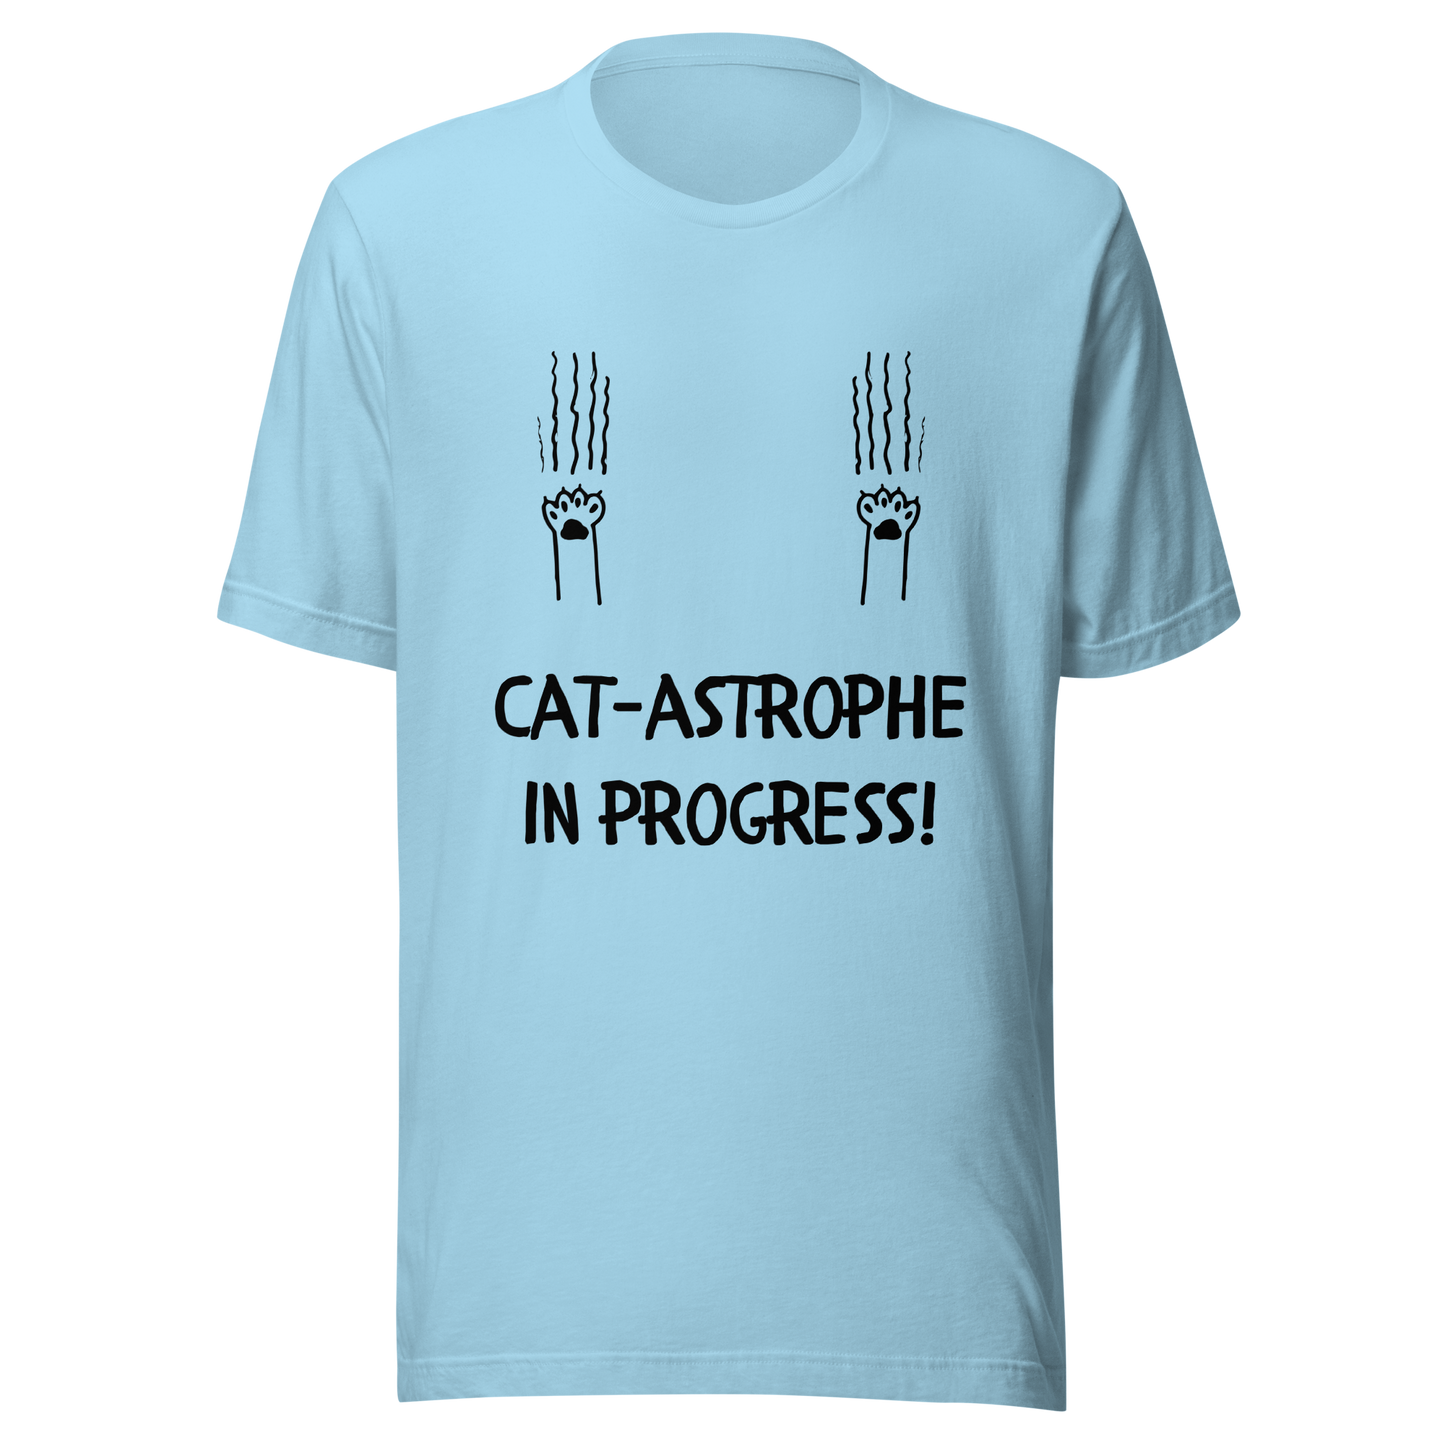 Unisex T-shirt - Stay Calm and Embrace the Paw-some Chaos with Our 'Cat-astrophe in Progress!'